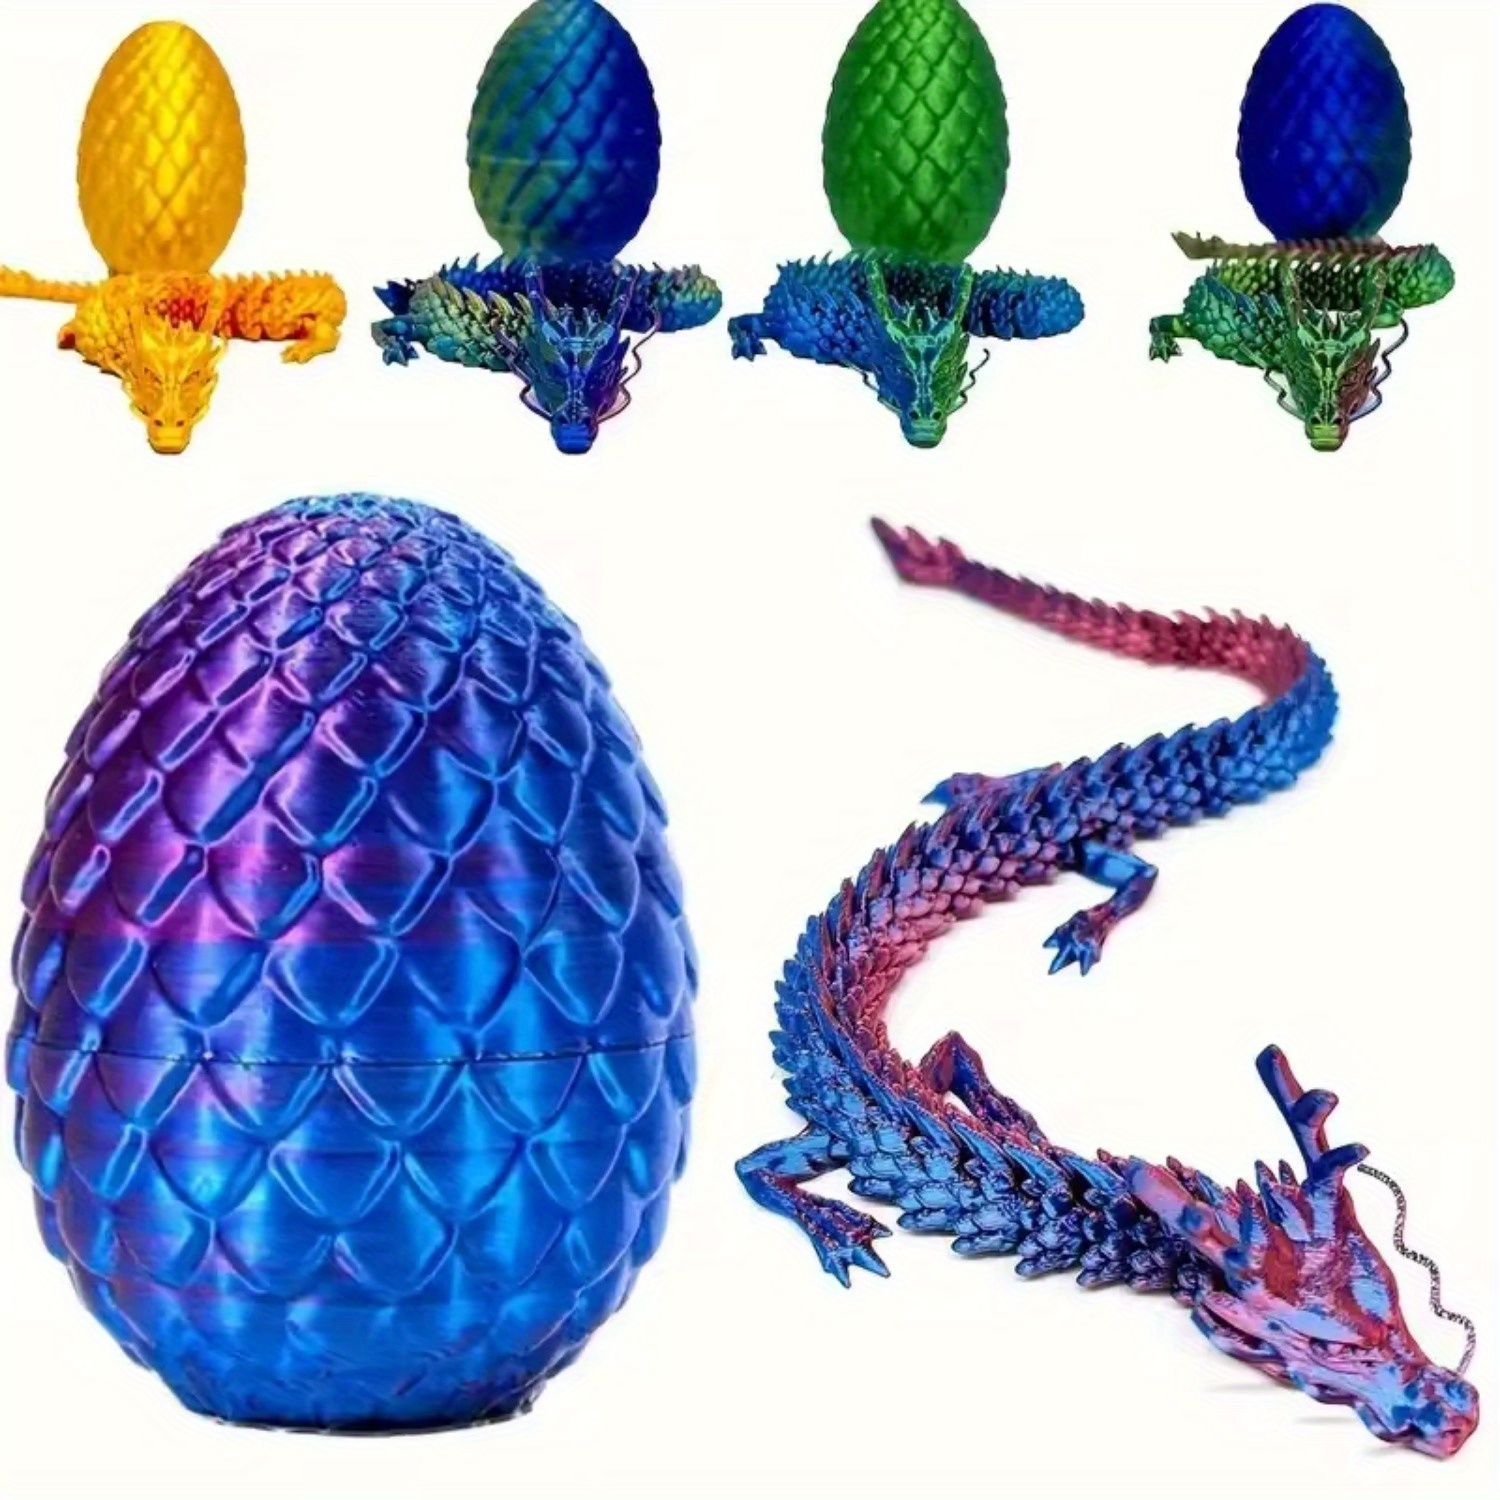 

1 Set 3d Printing Flexible Joint Dragon And Mini Dragon Eggs For Landscaping, Home Decor, Model Gifts, Office Decor, Halloween Room Decor Gothic, Creative Handheld Car Decoration Easter Gift